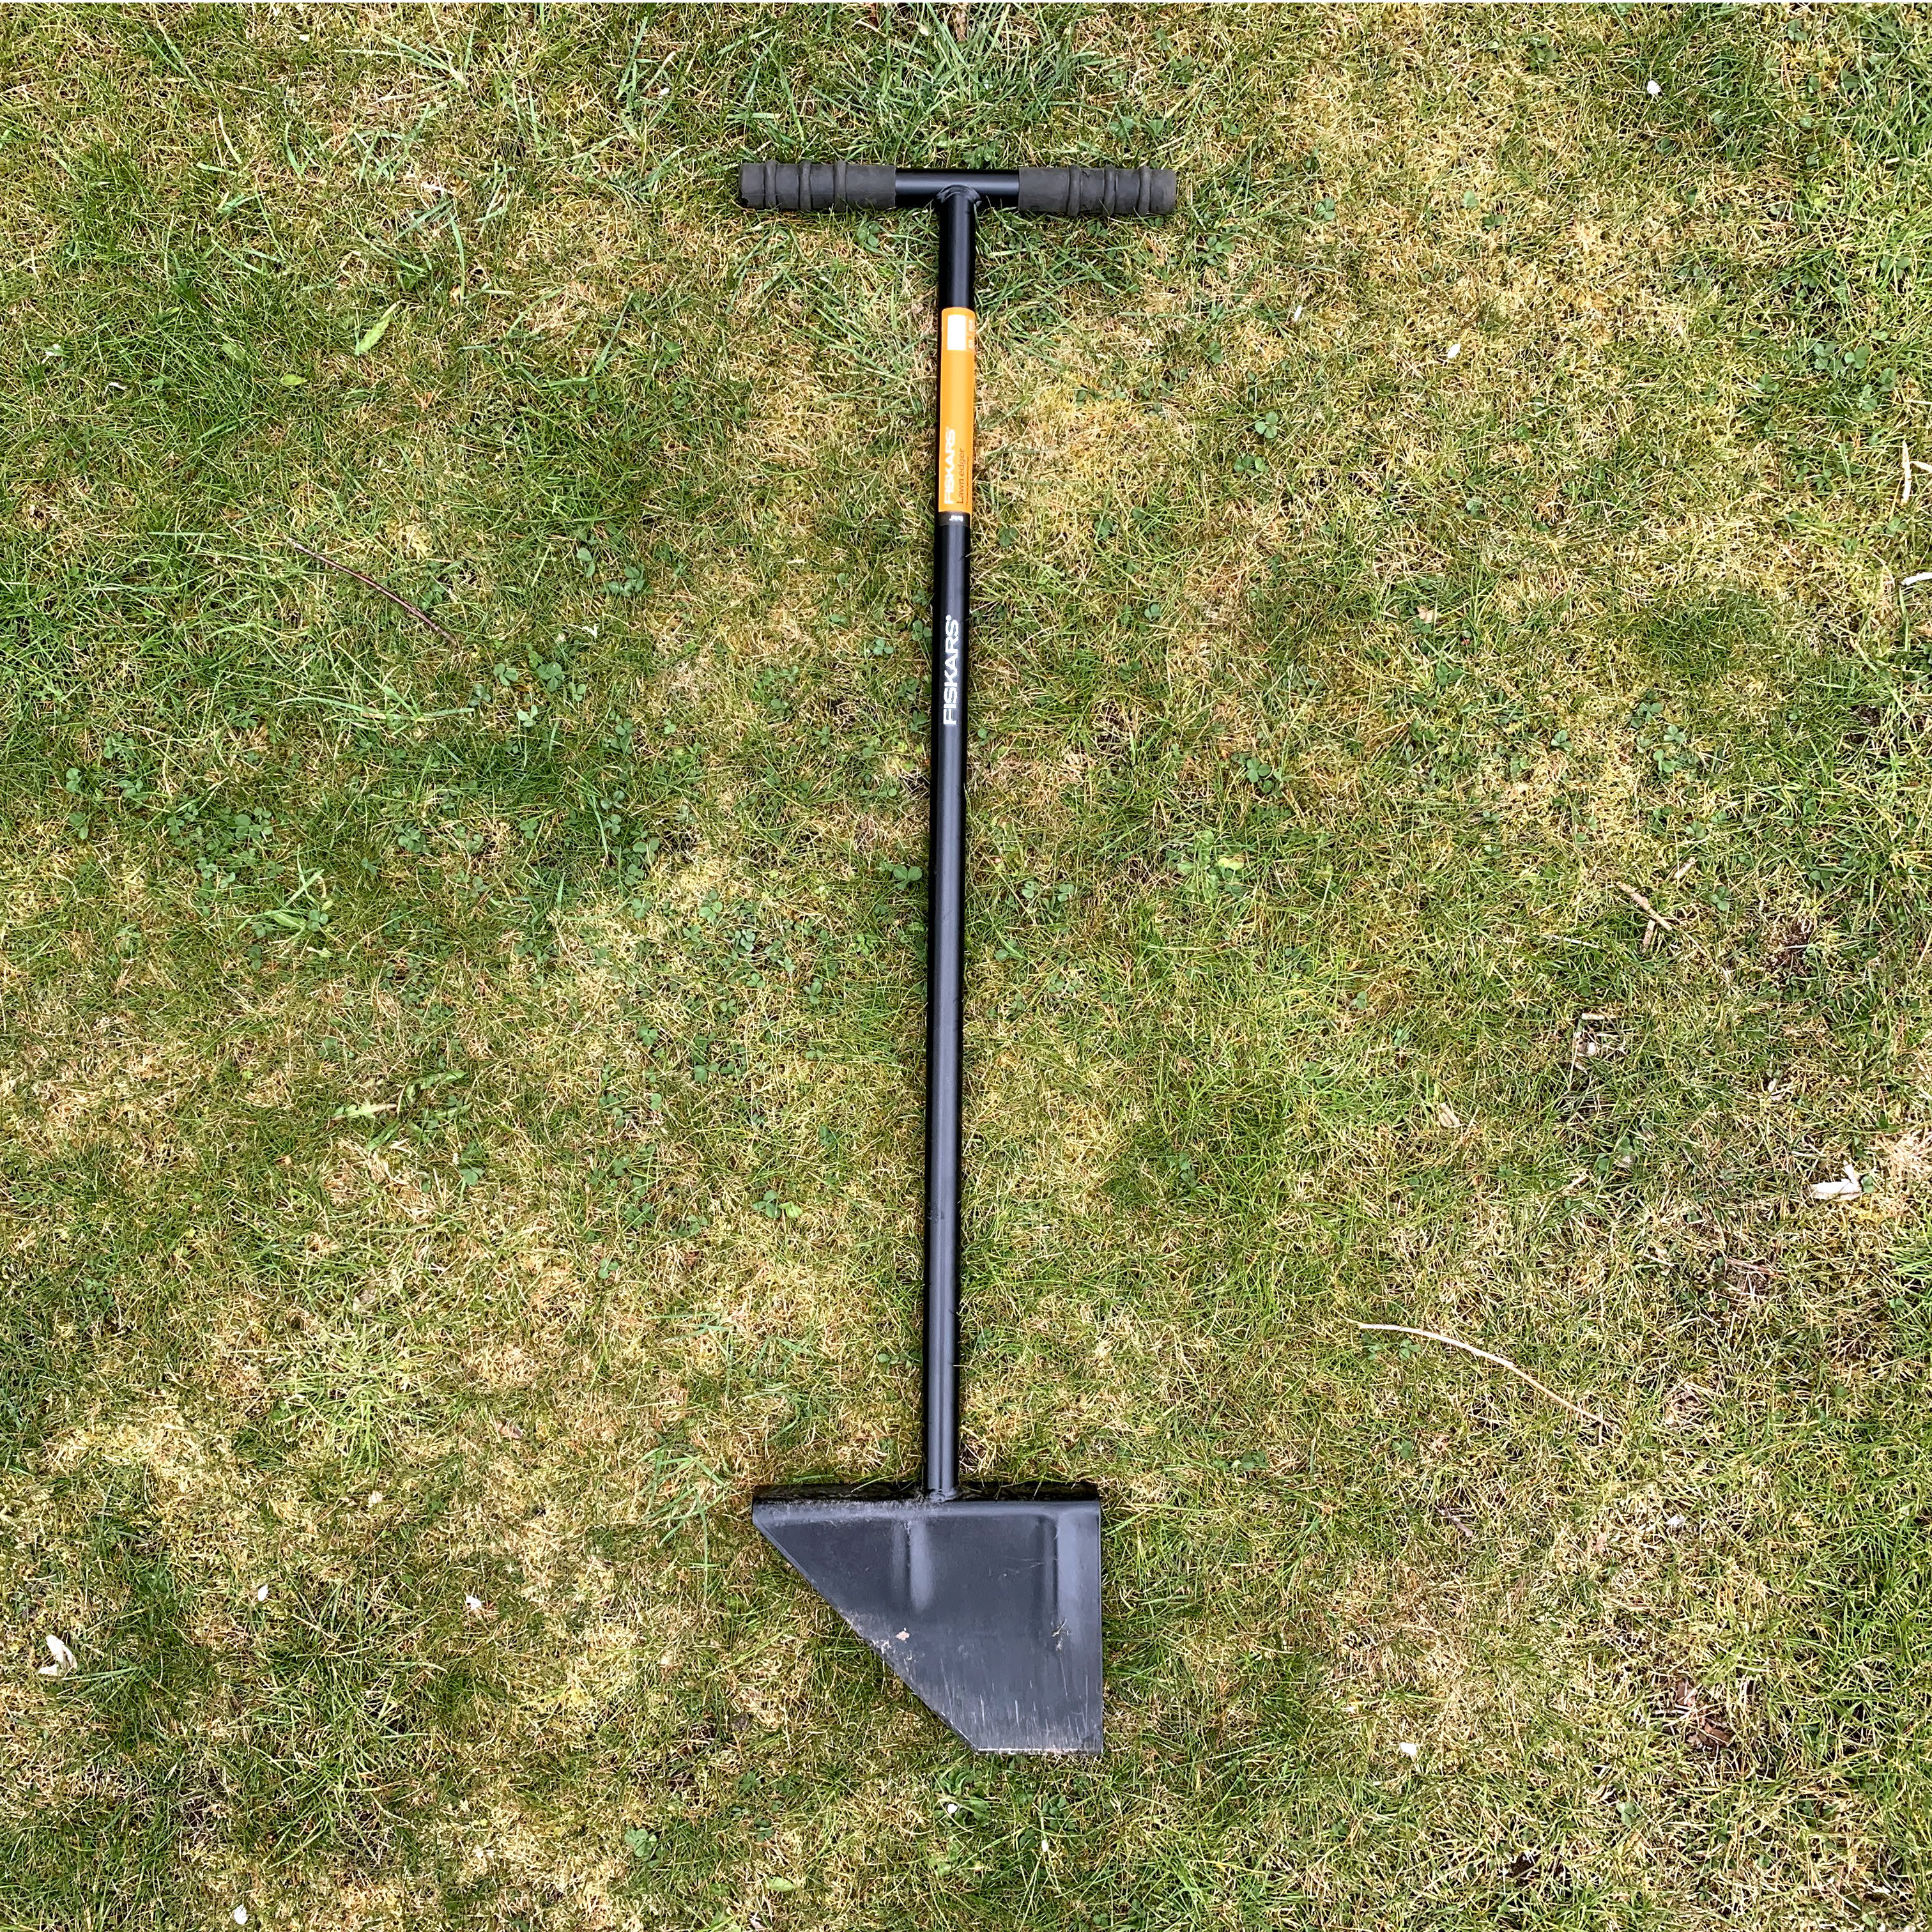 Lawn edger for easier digging down perimeter wire